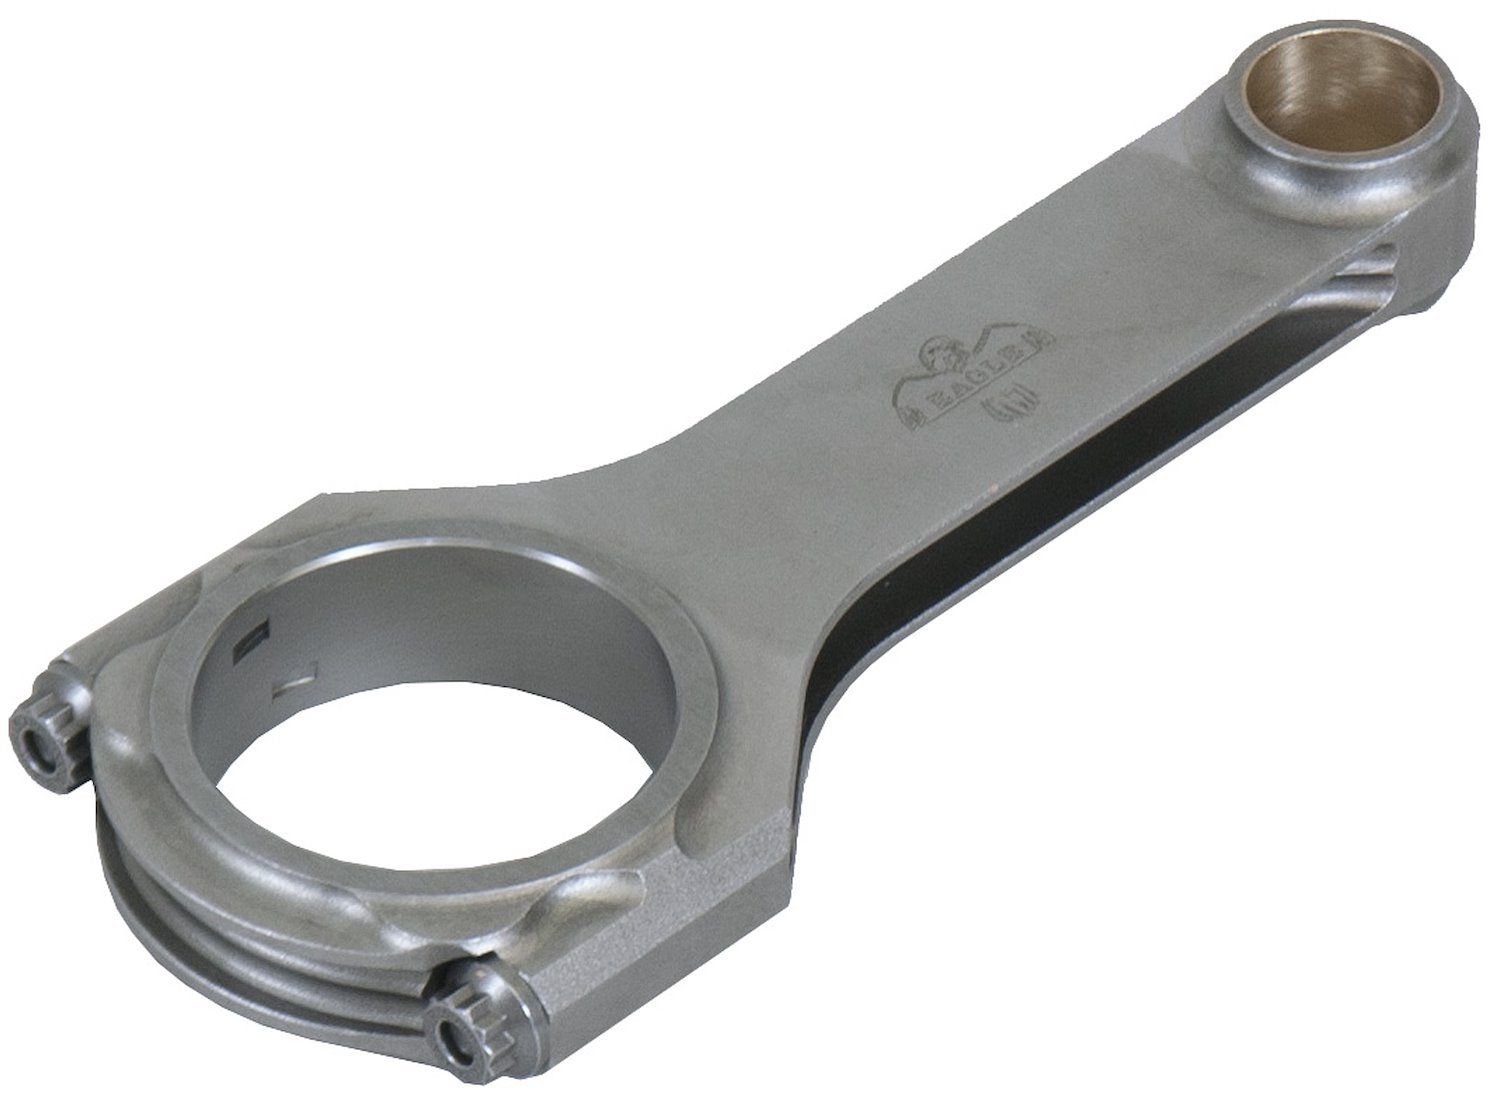 CRS5590T4D-1 H-Beam 4th Generation Design (4D) 5.590 in. Forged Steel Connecting Rod for Toyota 2JZ Engine